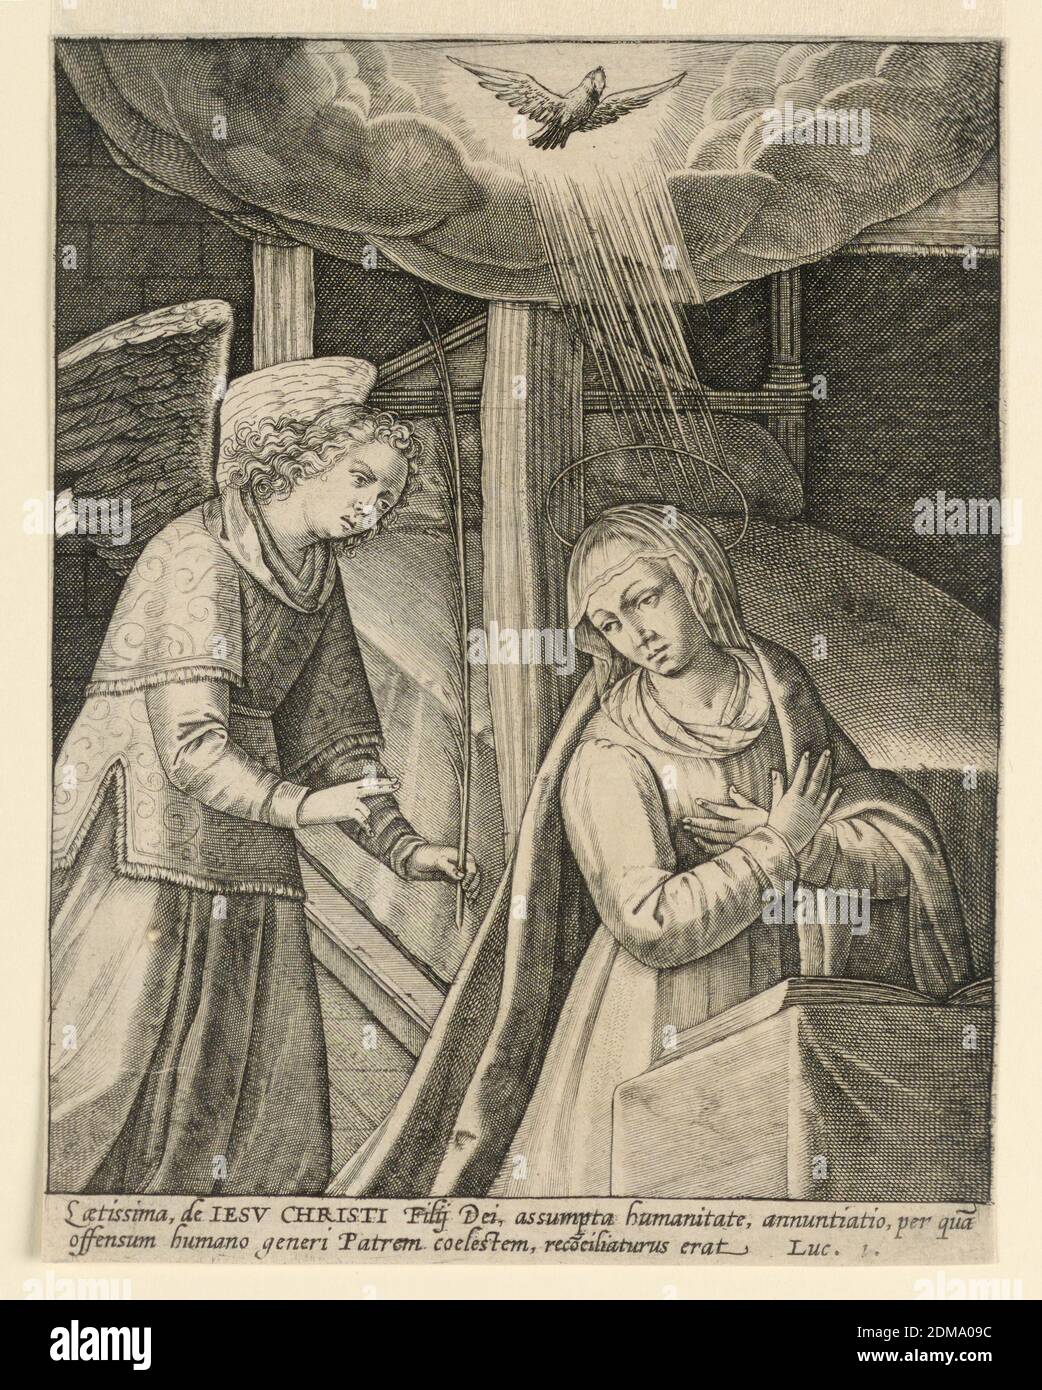 The Annunciation, Engraving on paper, The Virgin, kneeling at prayer before her bed, is approached by the Angle, left, and above, the dome of the Holy Spirit in a nimbus. Below, two-line verse from the Gospel of St. Luke in Latin., Netherlands, ca. 1575, Print Stock Photo